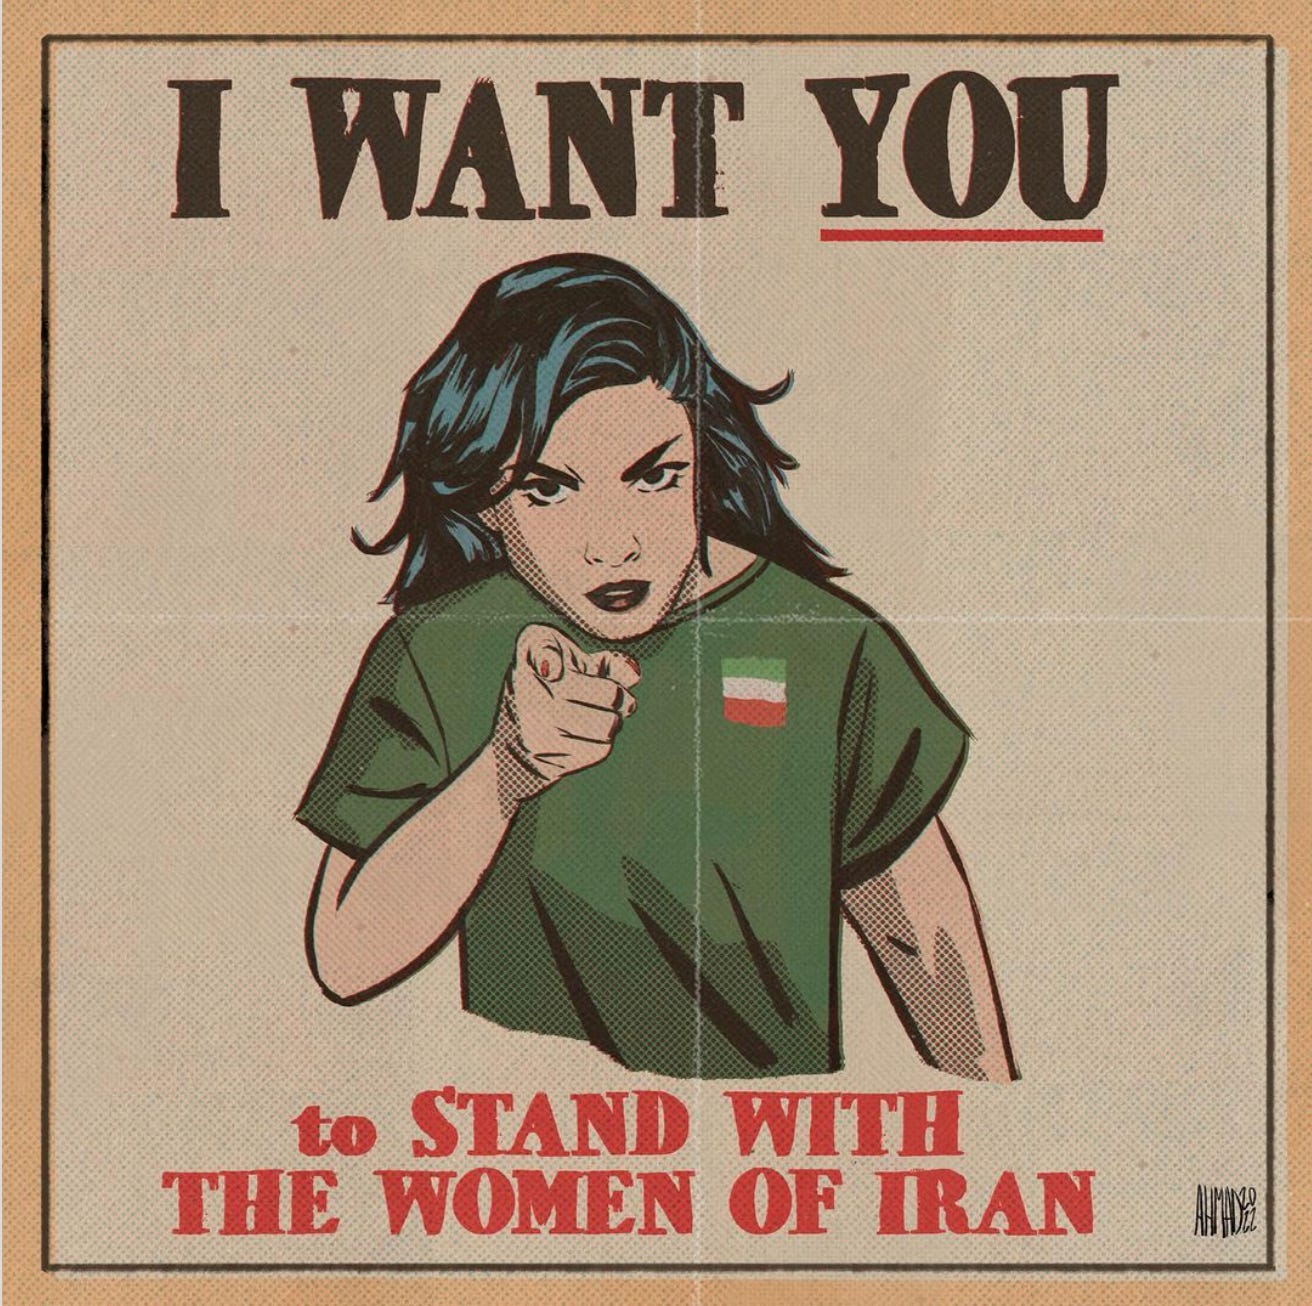 The illustrated poster features a woman in a green t-shirt pointing at the reader. The poster reads "I want you...To stand with the women of Iran" The background is light brown and the words are dark brown. The woman has long hair and is wearing nail varnish.